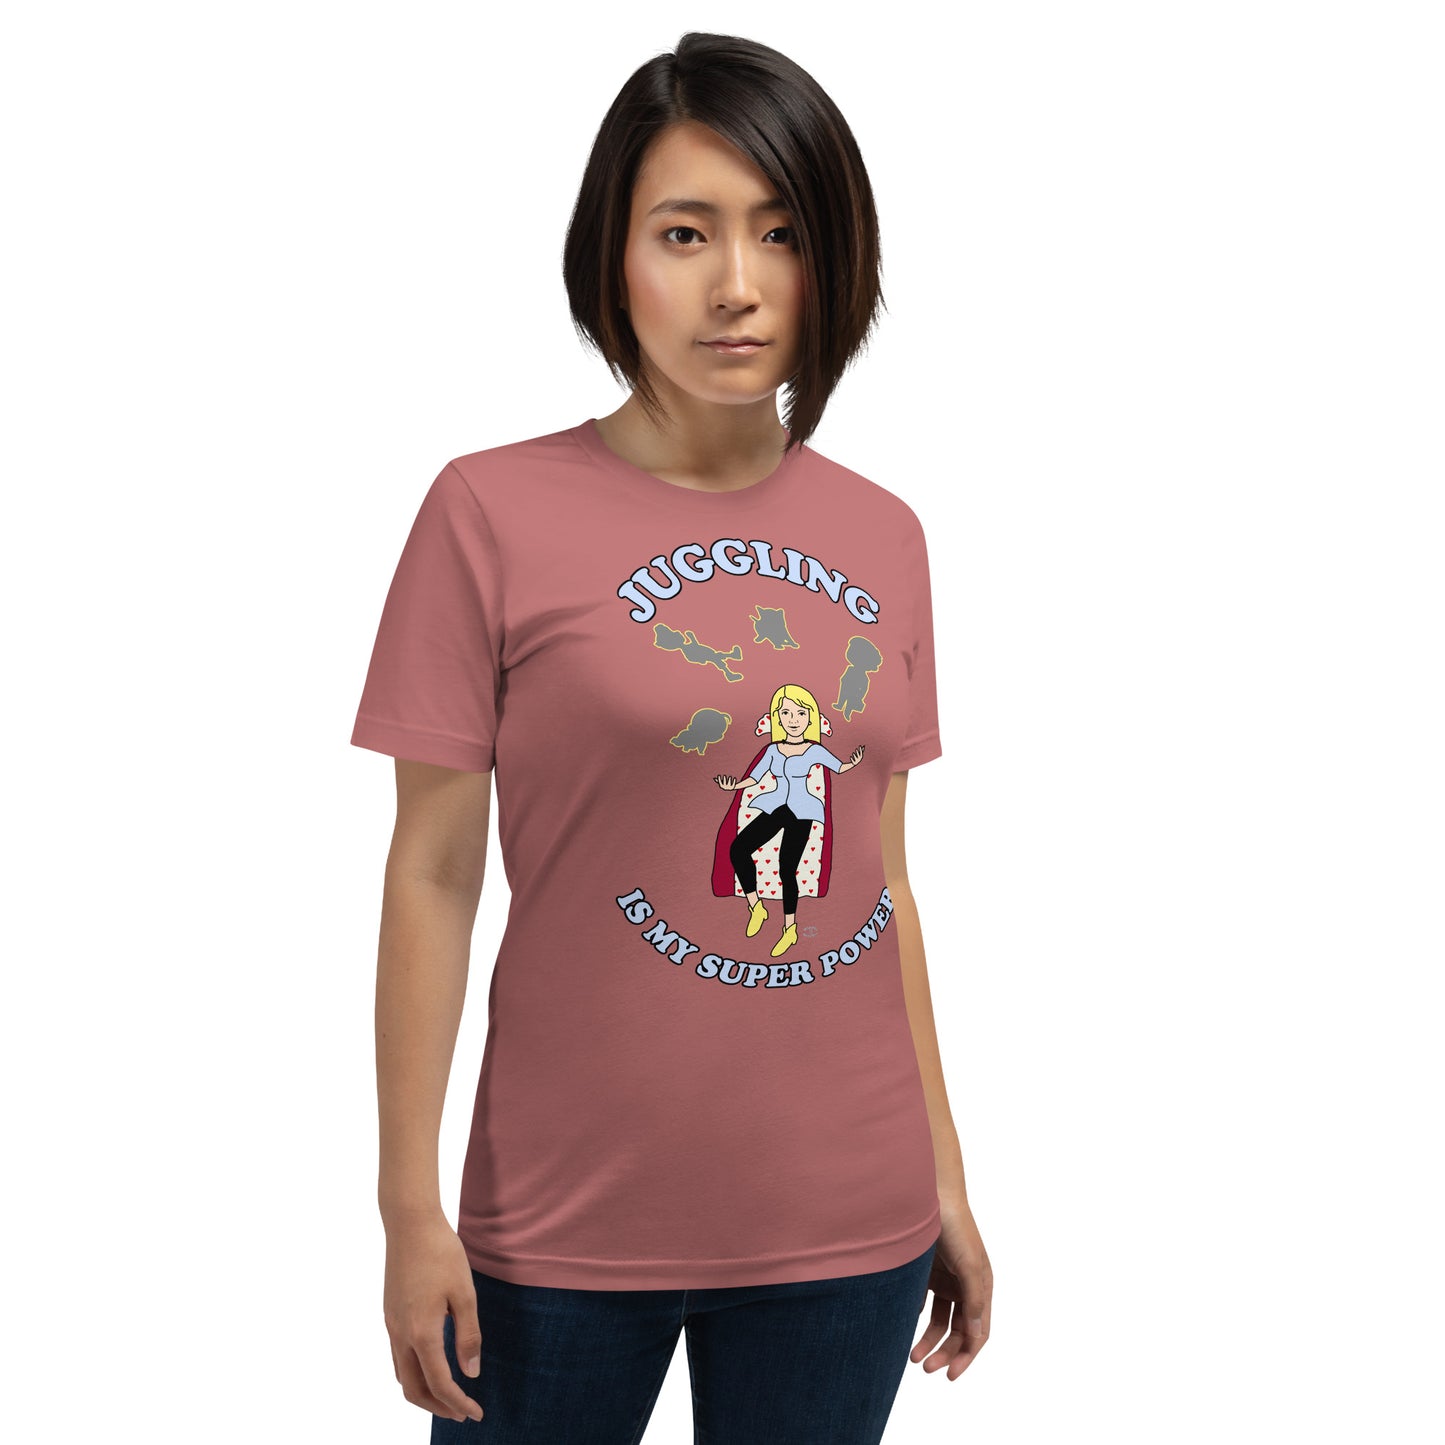 A women wearing a unisex short sleeve tshirt which has on the front a cartoon women in a cape juggling her family like a jester and the text Juggling Is My Super Power - front - mauve